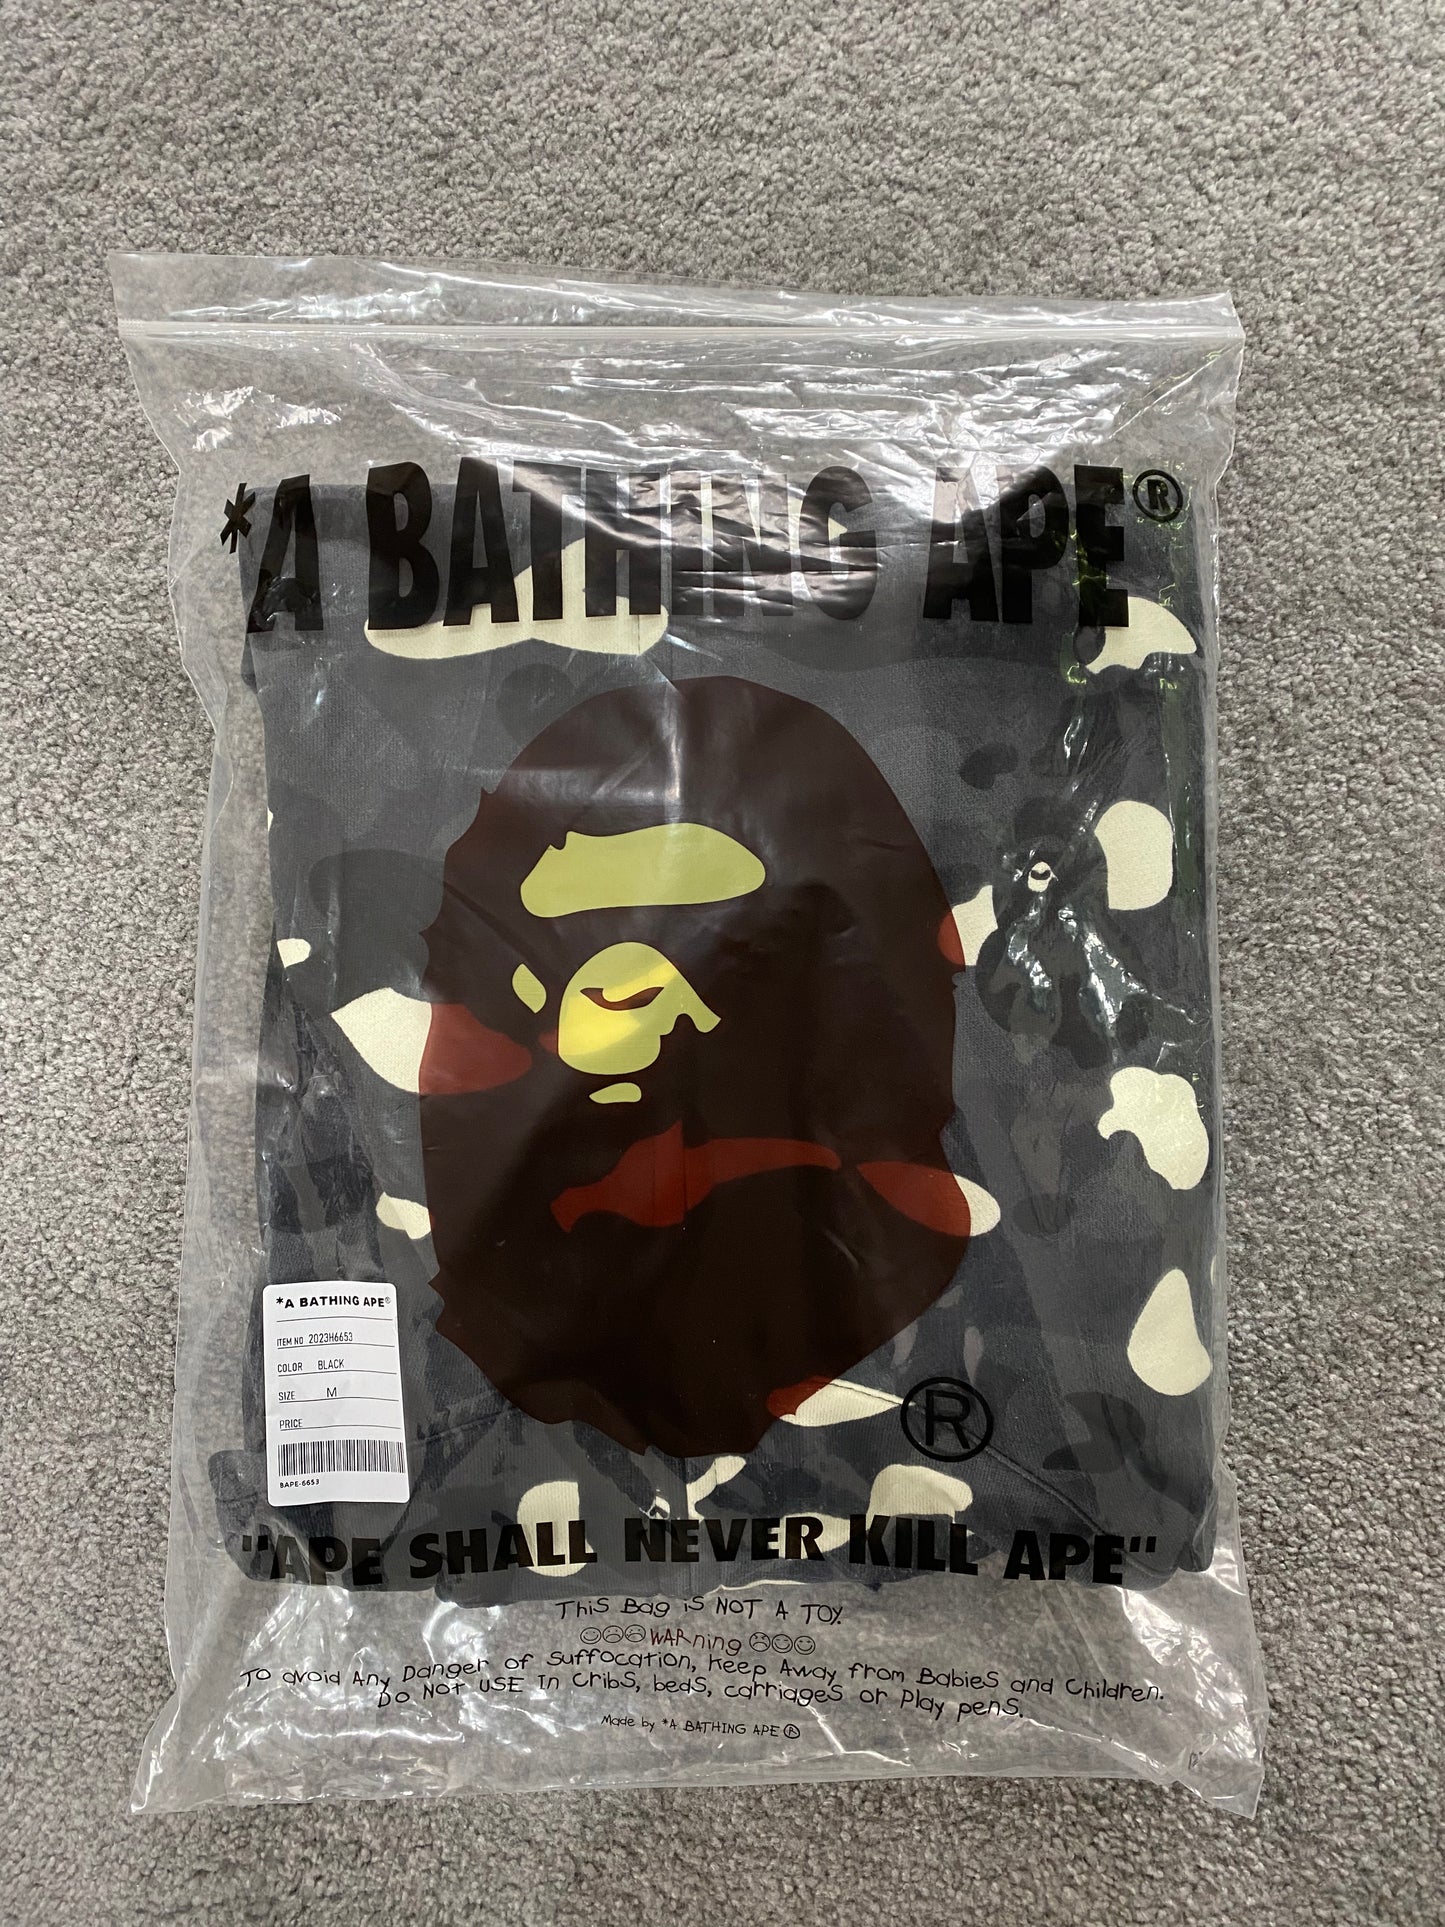 BAPE Black Camo Glow In The Dark Hoodie - Icy Clothes Ro